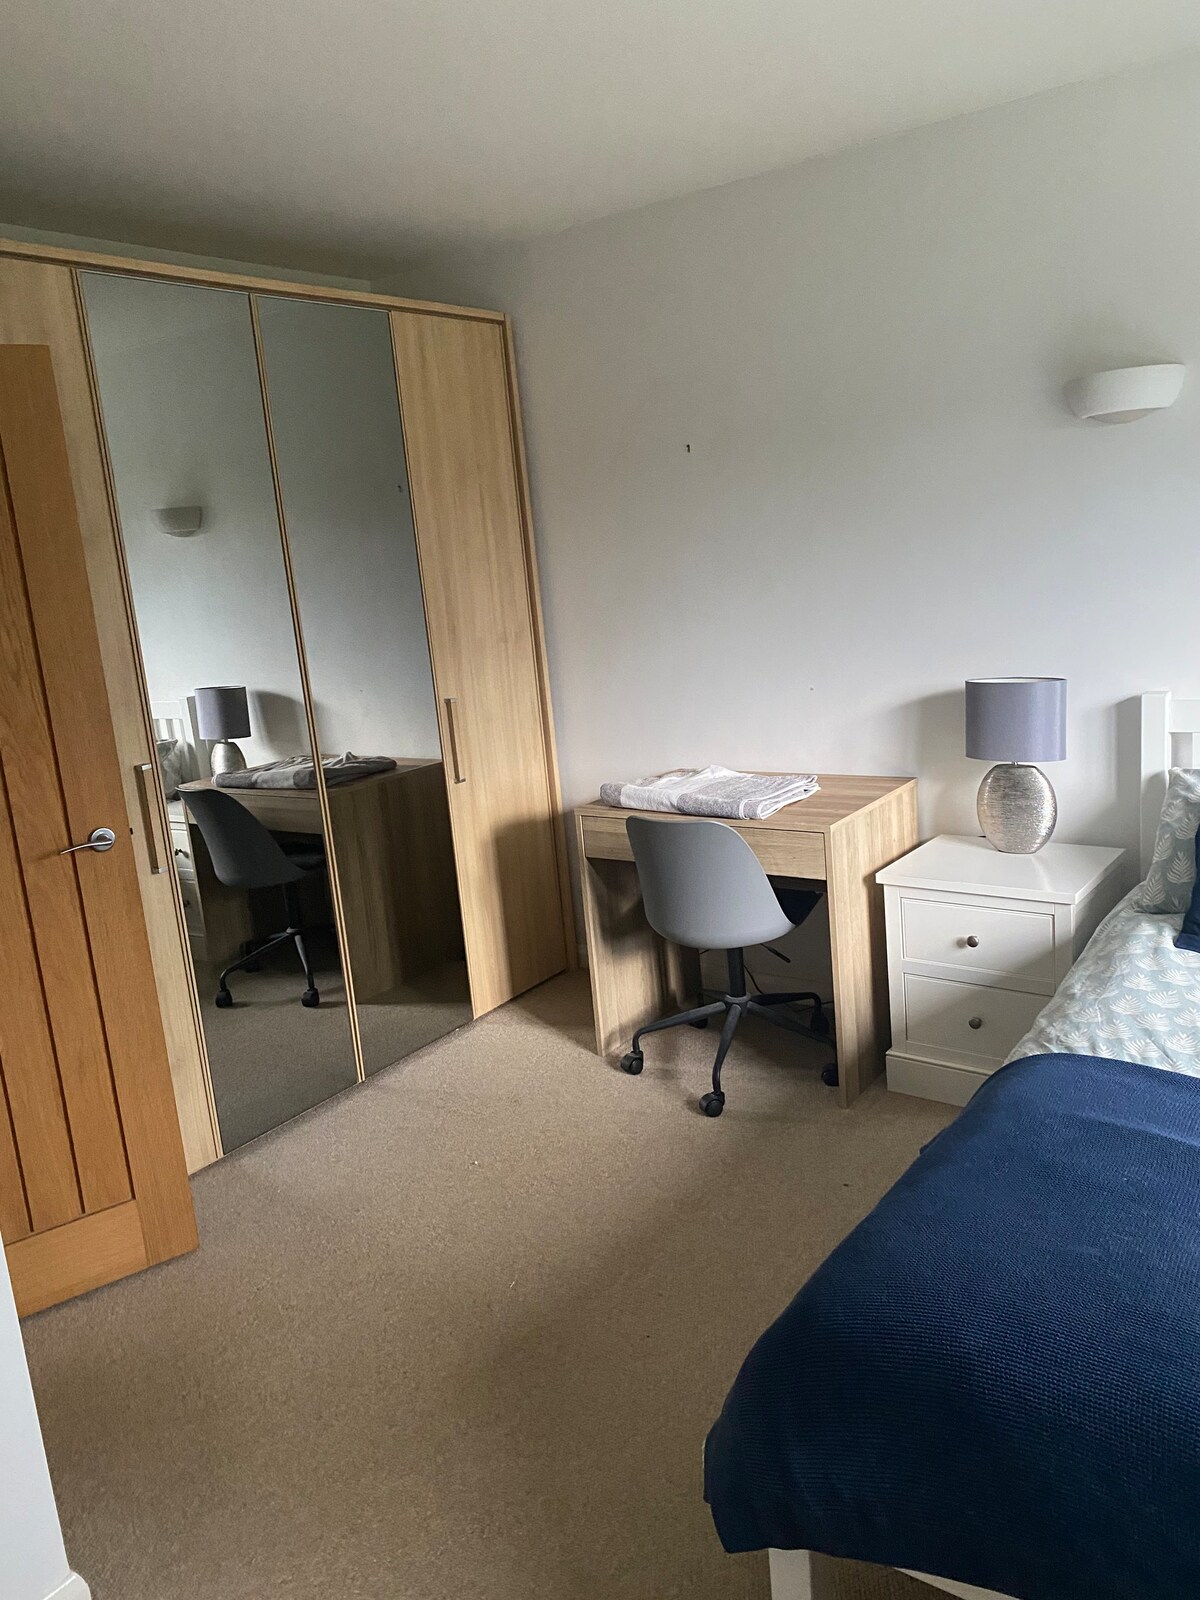 Ensuite double room in detached house.